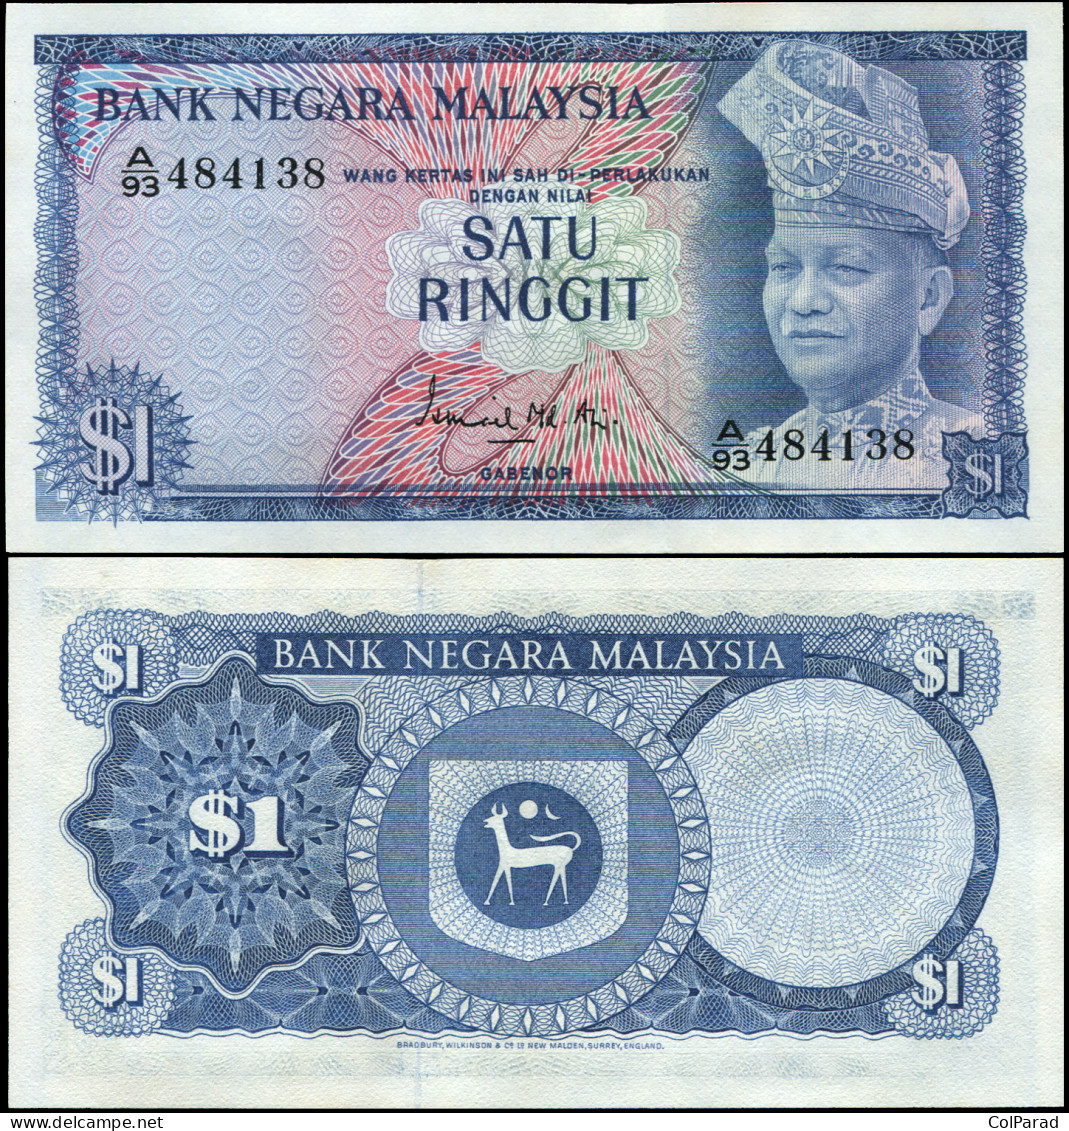 MALAYSIA 1 RINGGIT - ND (1967) - Paper Unc - P.1a Banknote - Maleisië